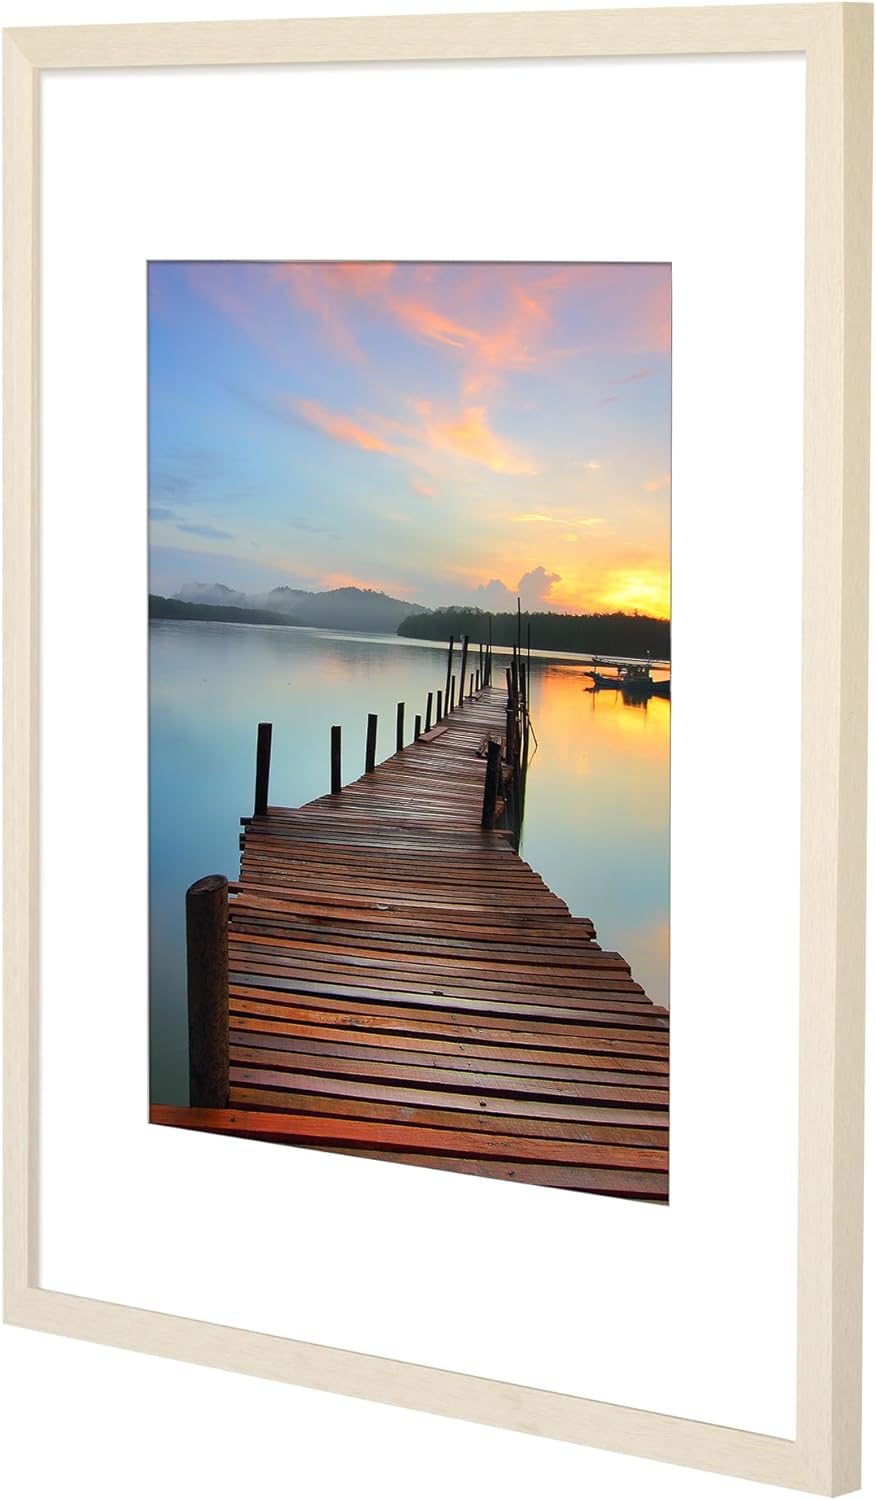 Home - Printed picture frame mats